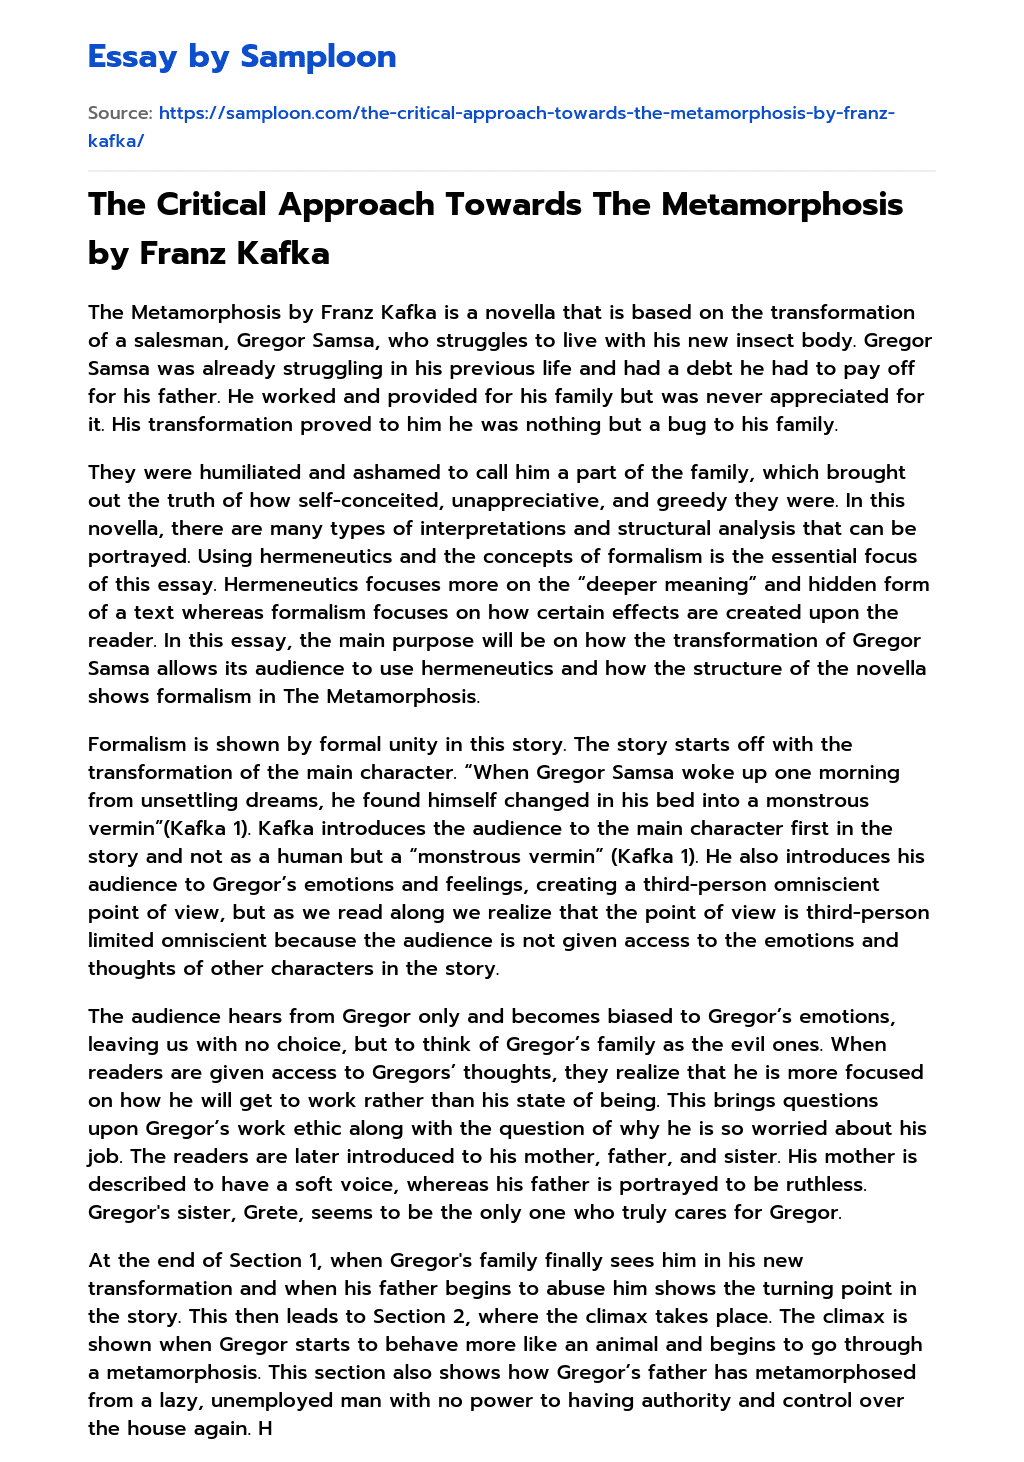 The Critical Approach Towards The Metamorphosis by Franz Kafka Literary Analysis essay